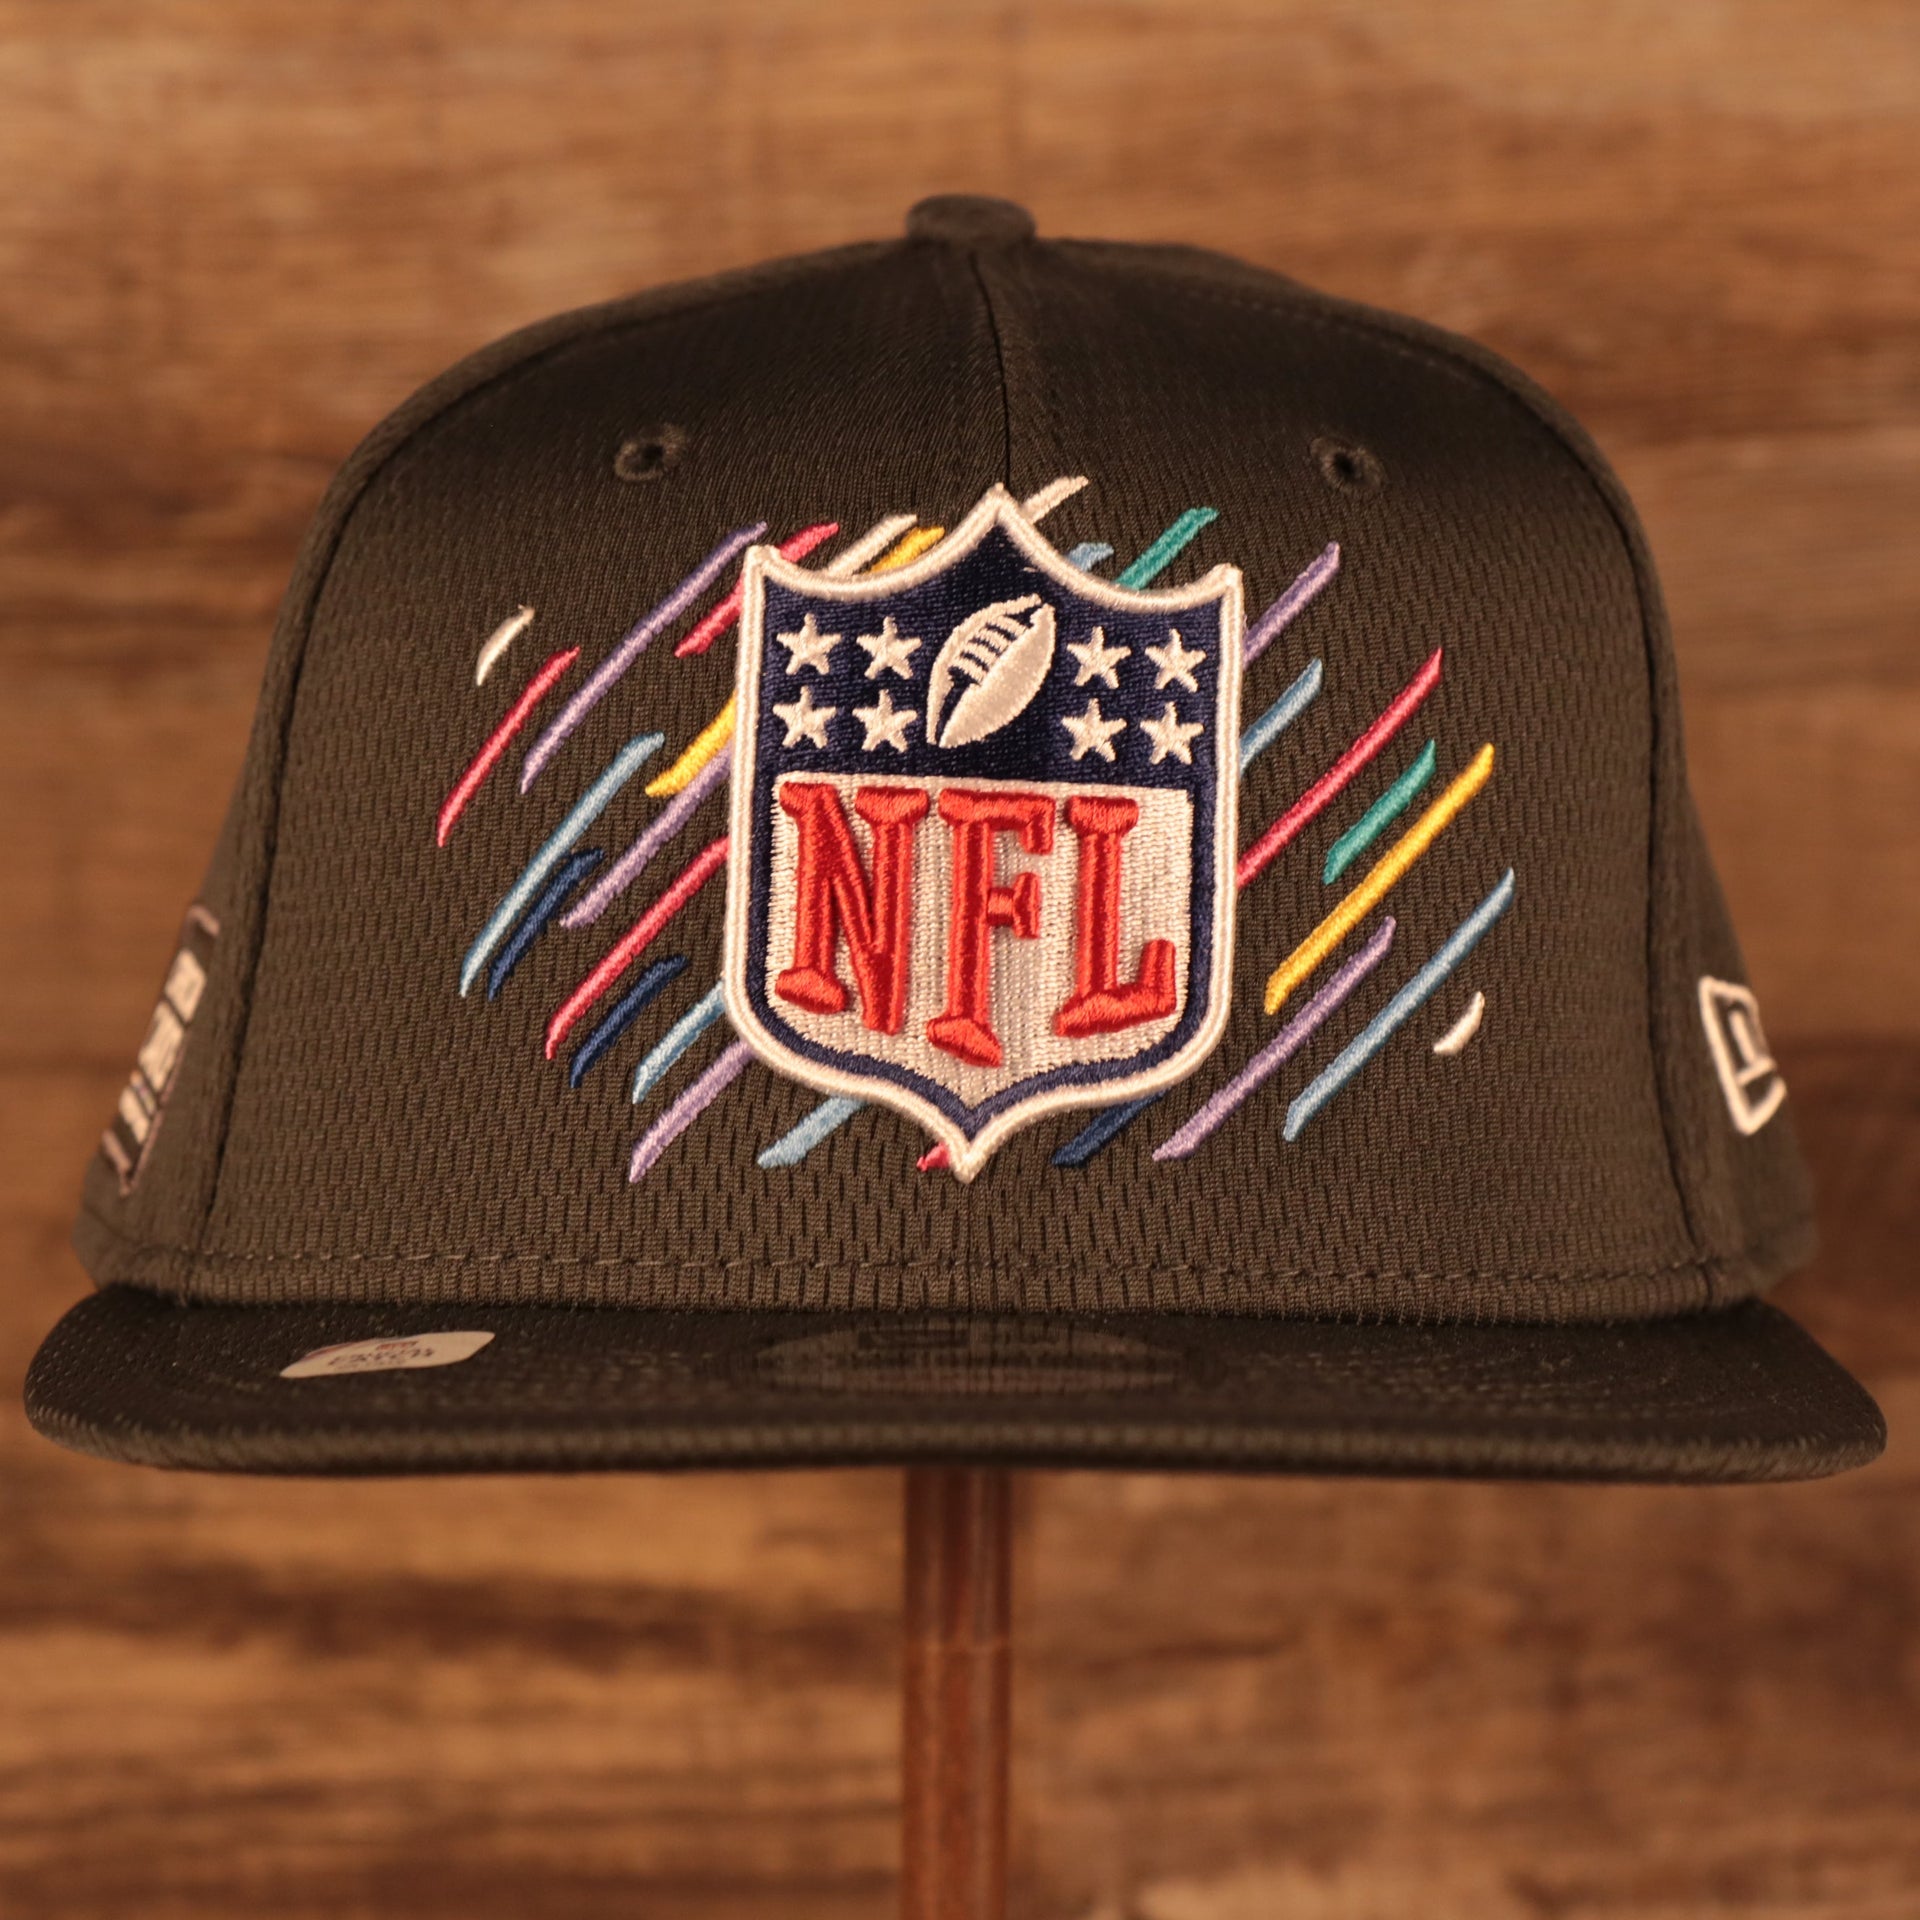 Front View of this NFL logo Cancer Awareness 9Fifty Snapback Cap